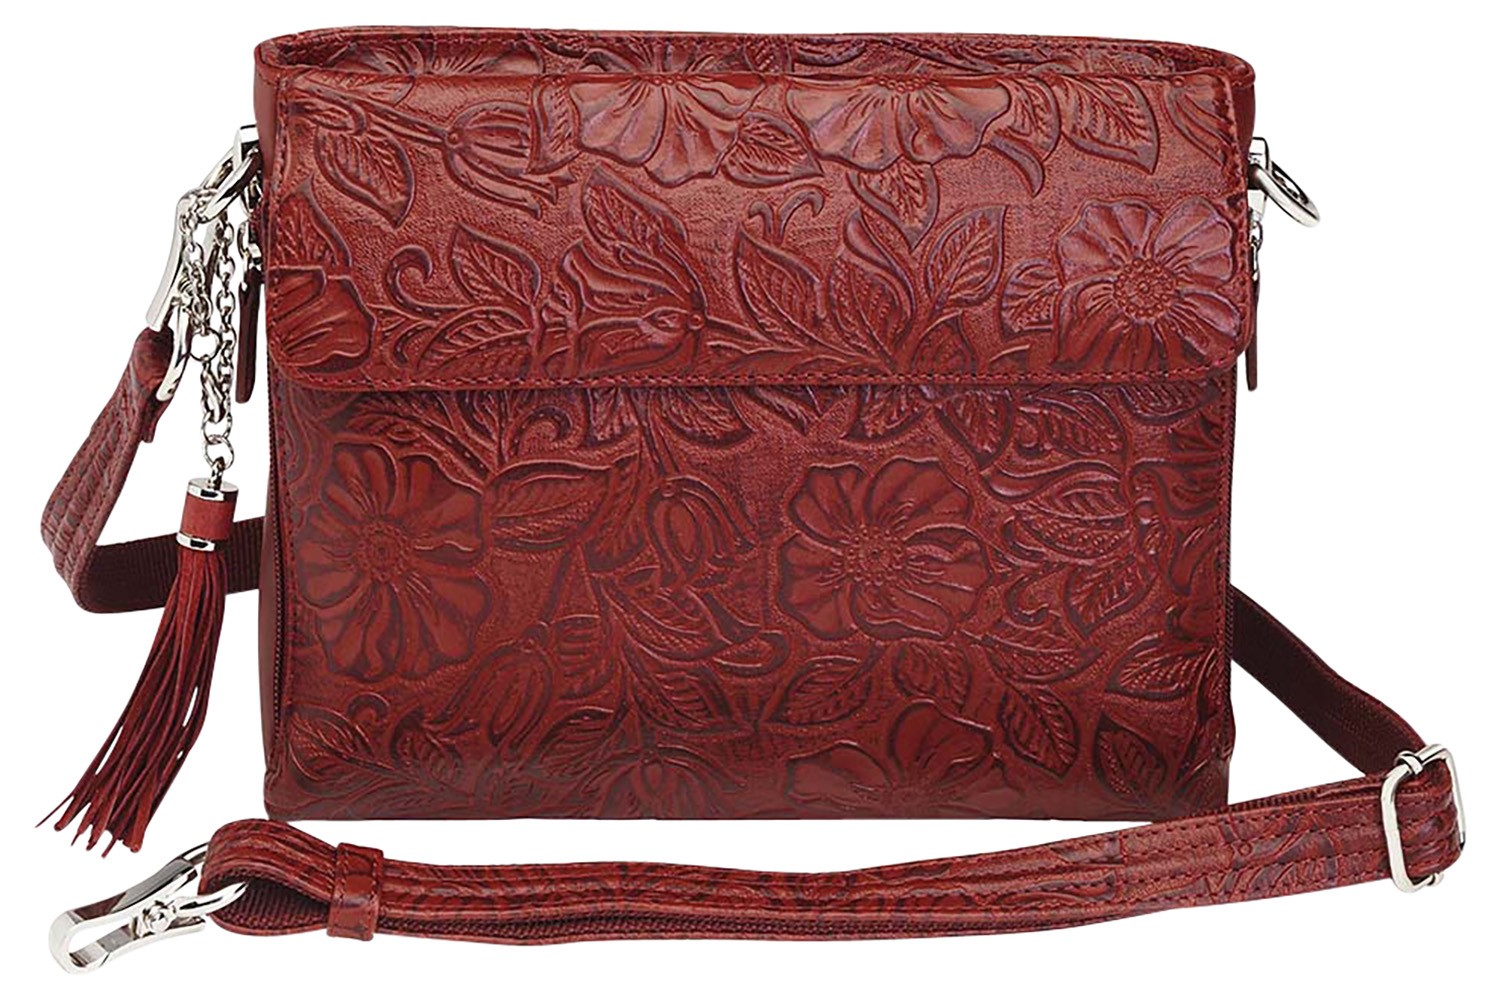 GTM CLUTCH PURSE, CHERRY LEATHER ETCHED W/SILVER ACCENTS,